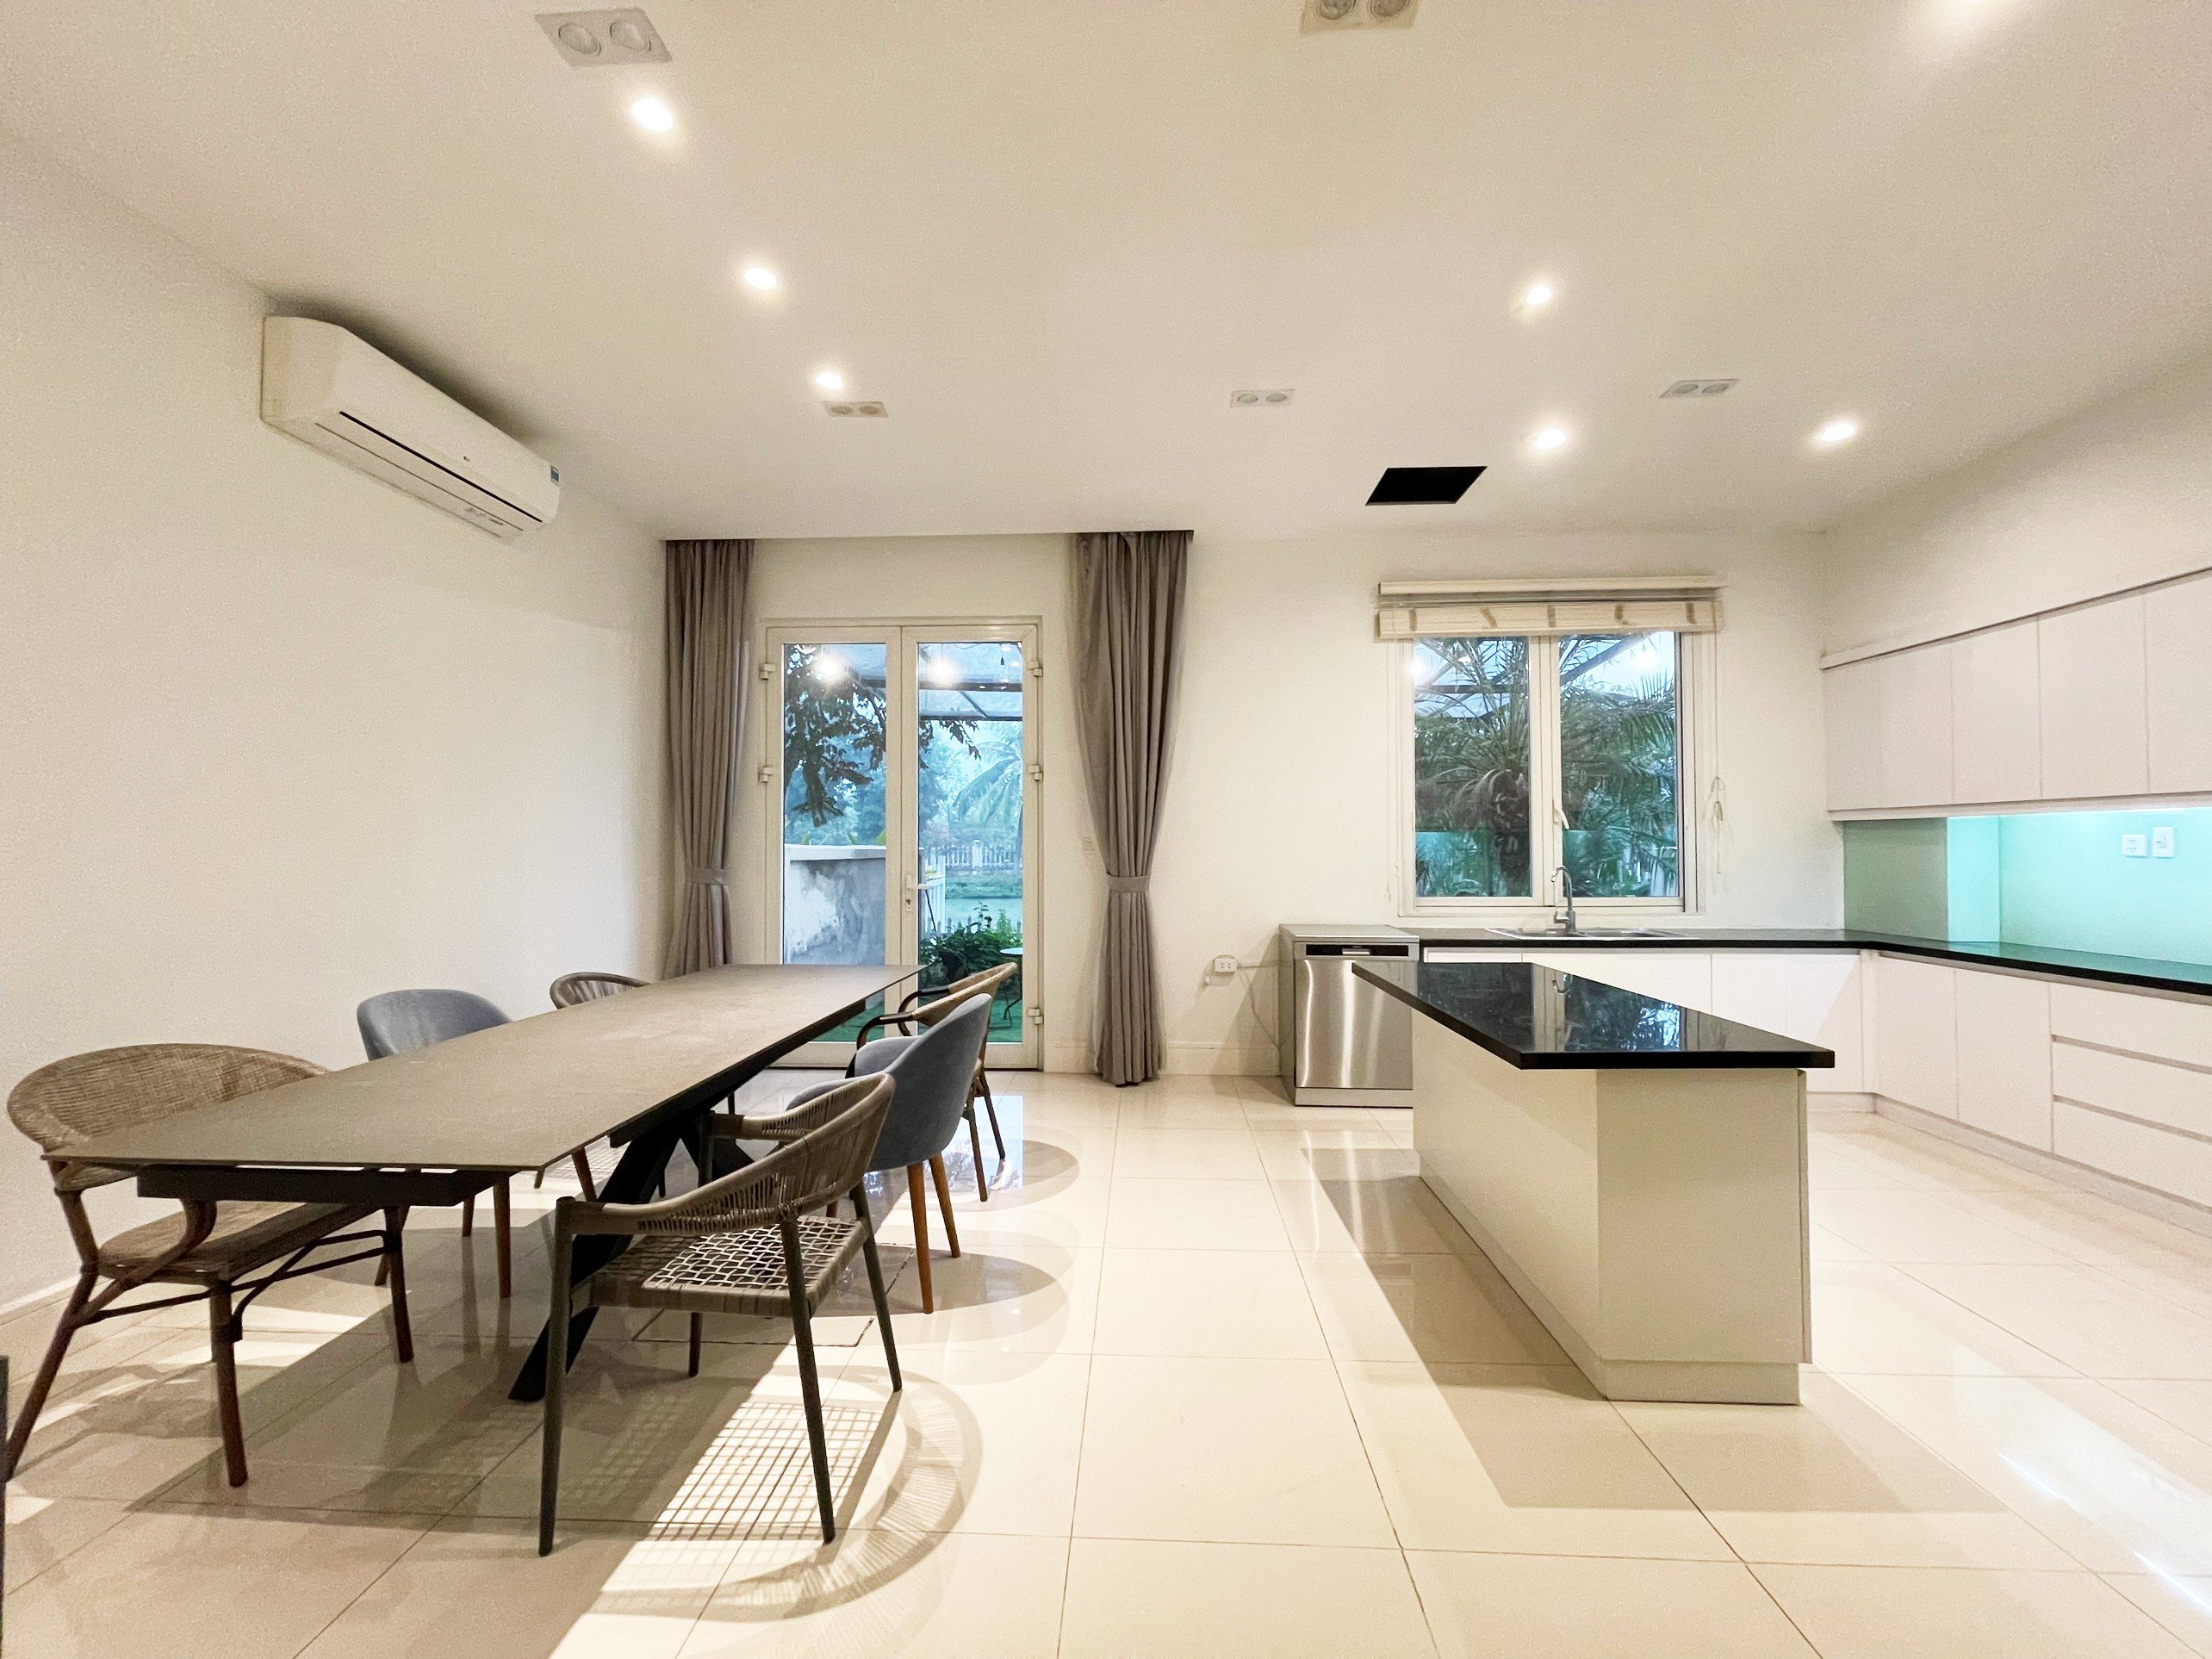 Reasonable Villa in Hoa Sua block, Vinhomes Riverside is Available for Rent now 3